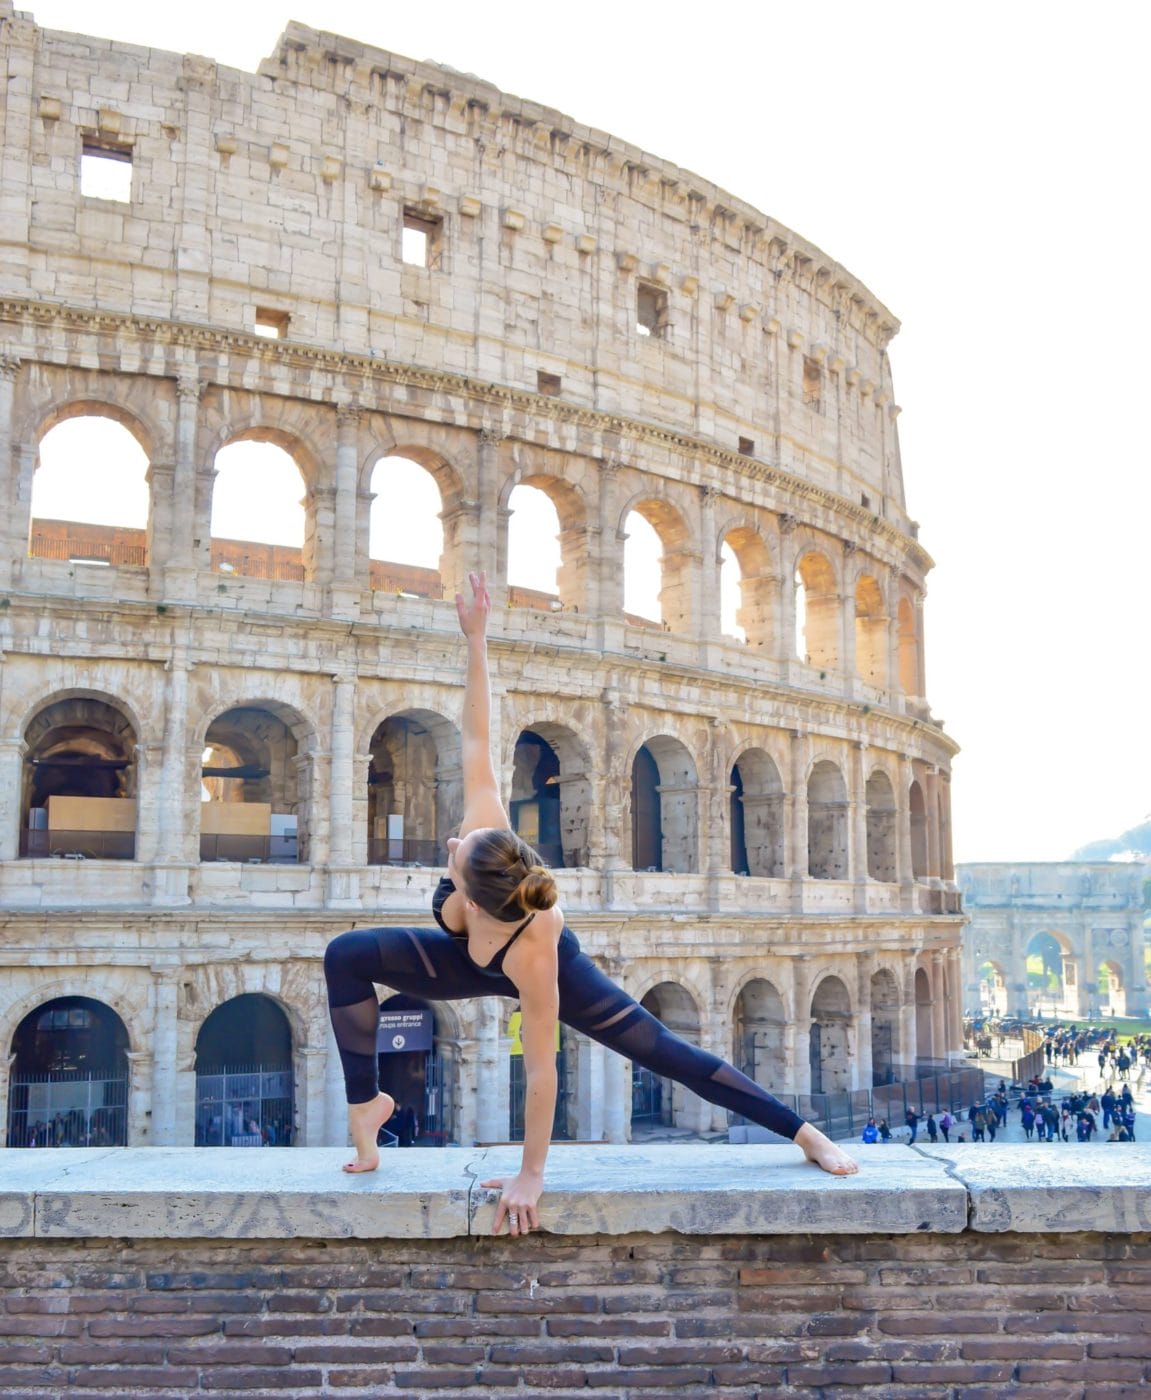 Yoga pose at the Colosseum, Rome Italy